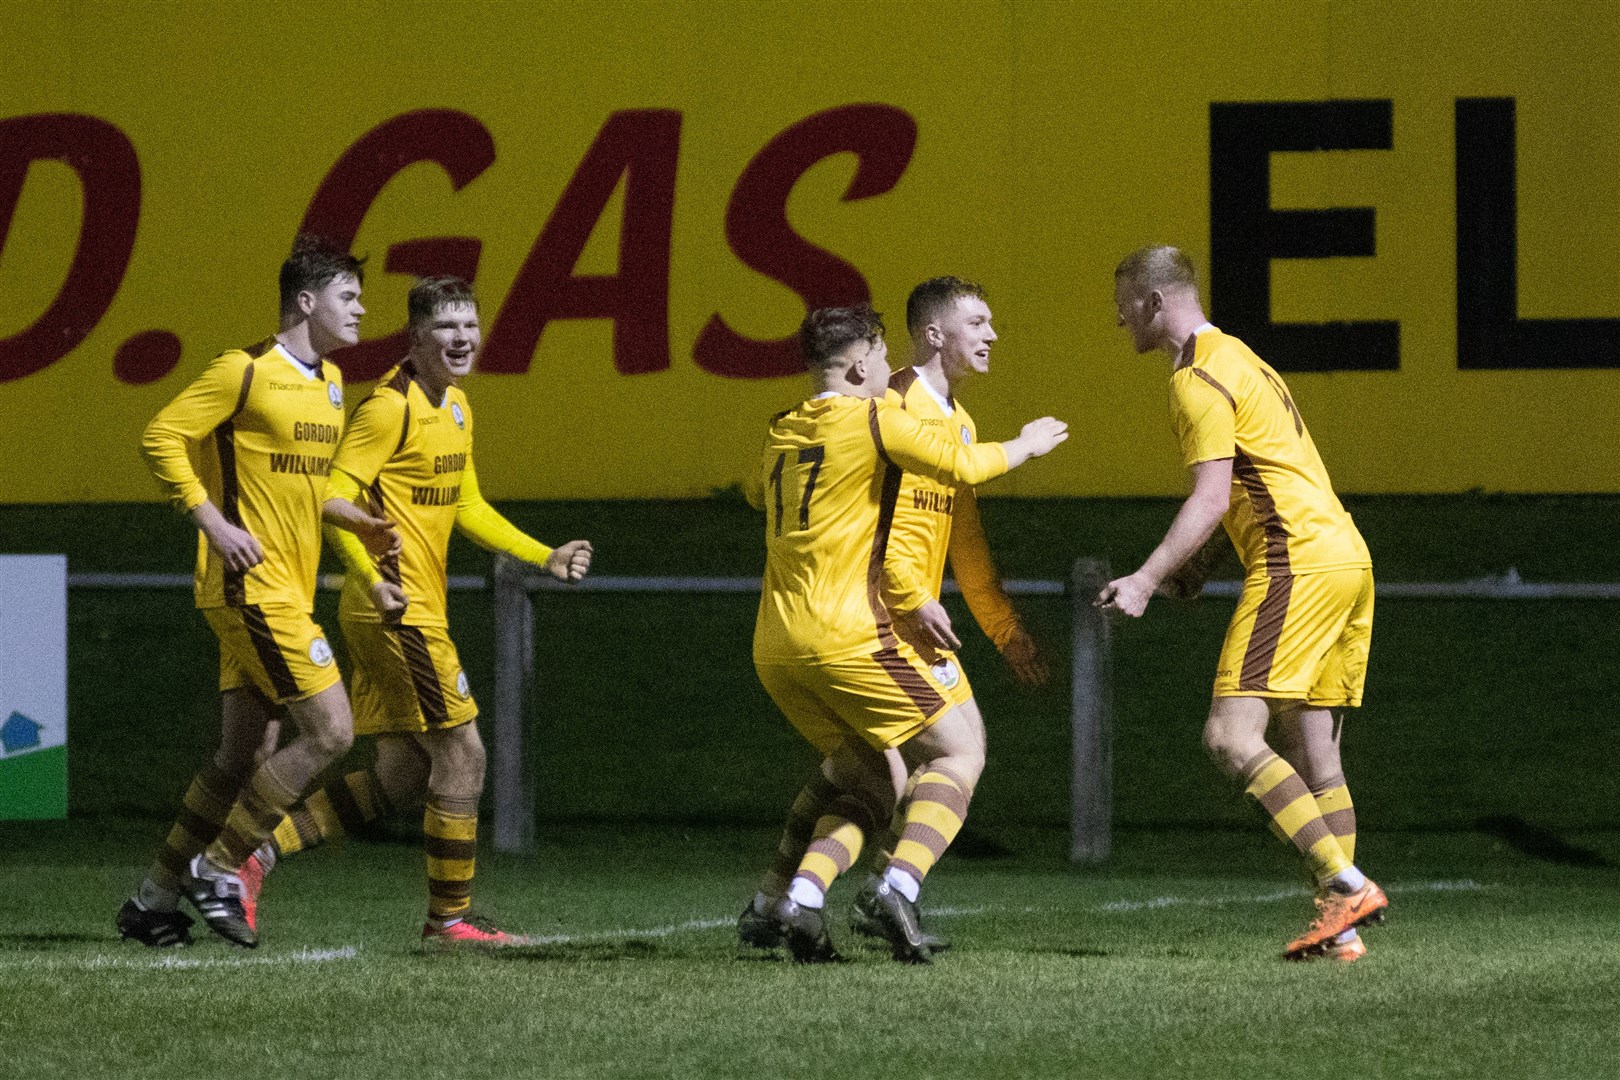 Forres' Lee Fraser wheels away to celebrate his late winner...Forres Mechanics FC (1) vs Lossiemouth FC (0) - Highland Fotball League 22/23 - Mosset Park, Forres 23/12/22...Picture: Daniel Forsyth..